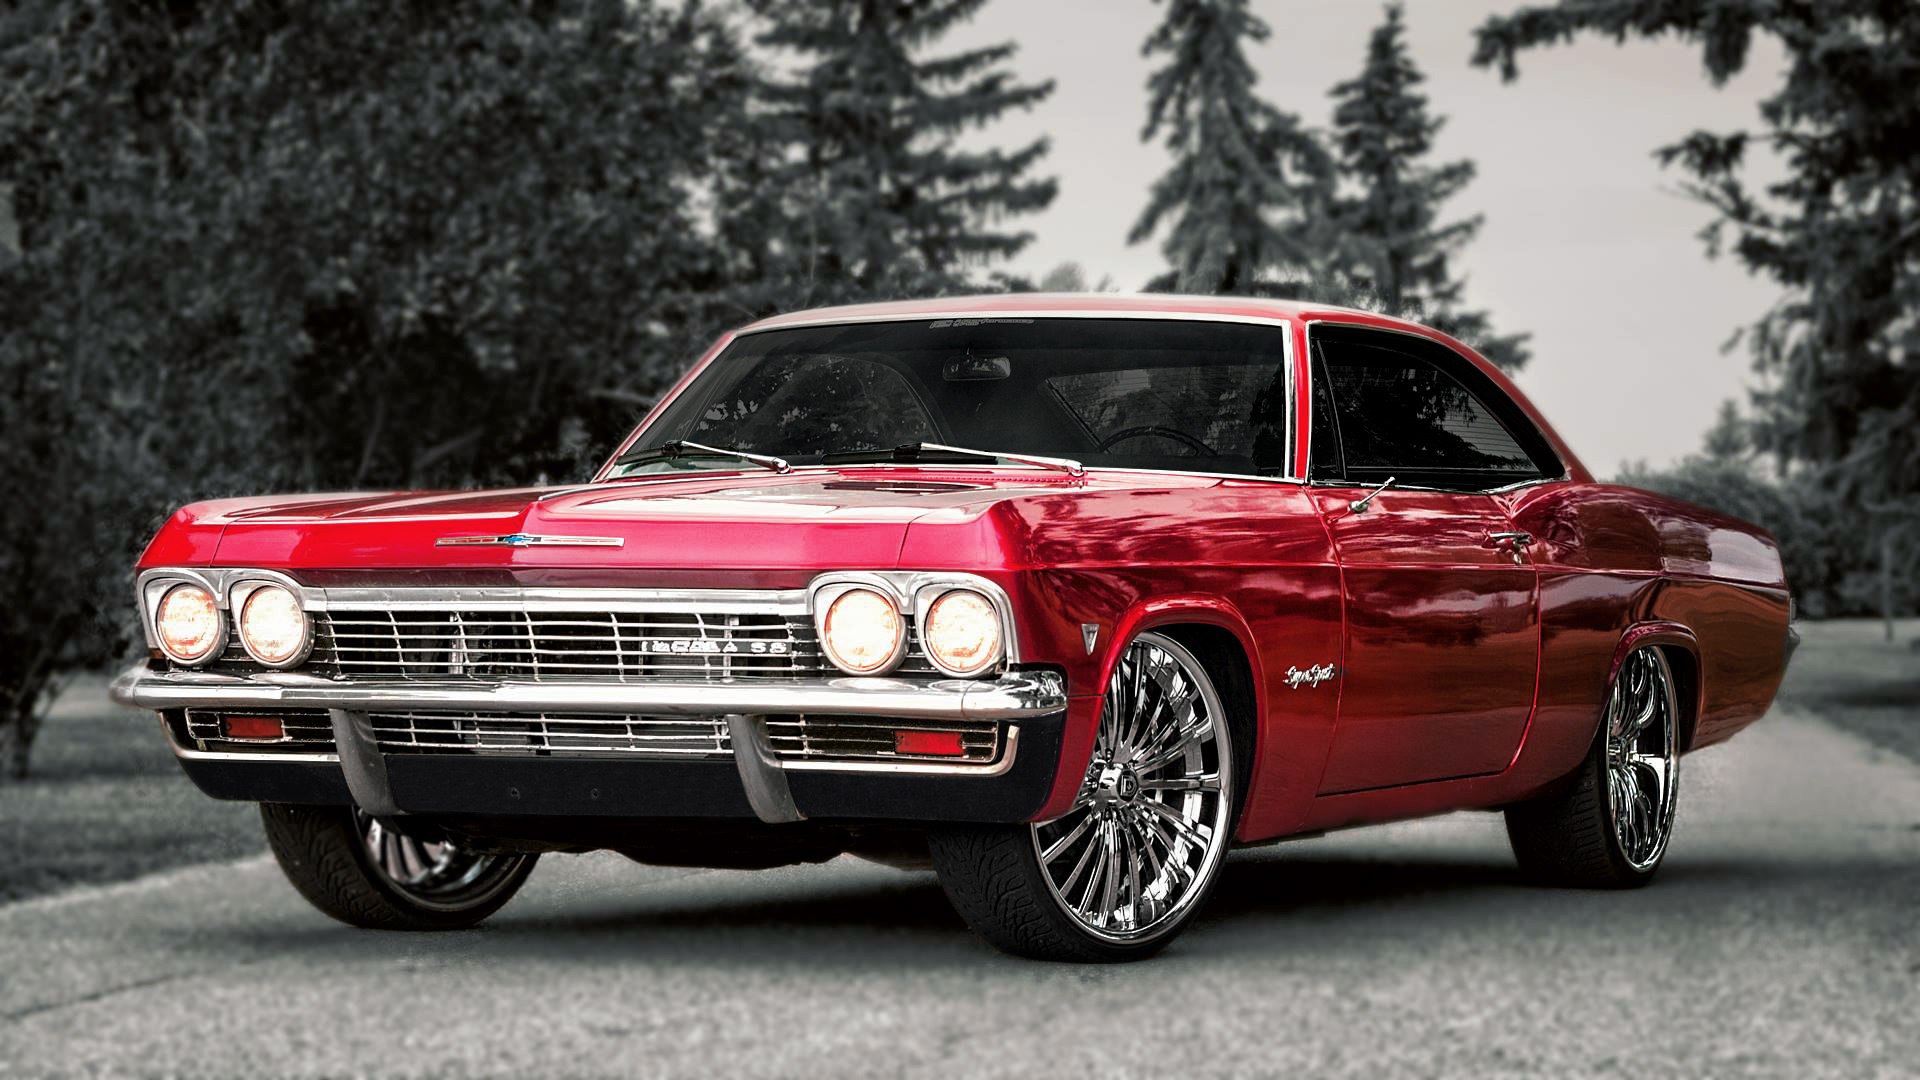 Wallpaper The classical model of Chevrolet Impala SS.